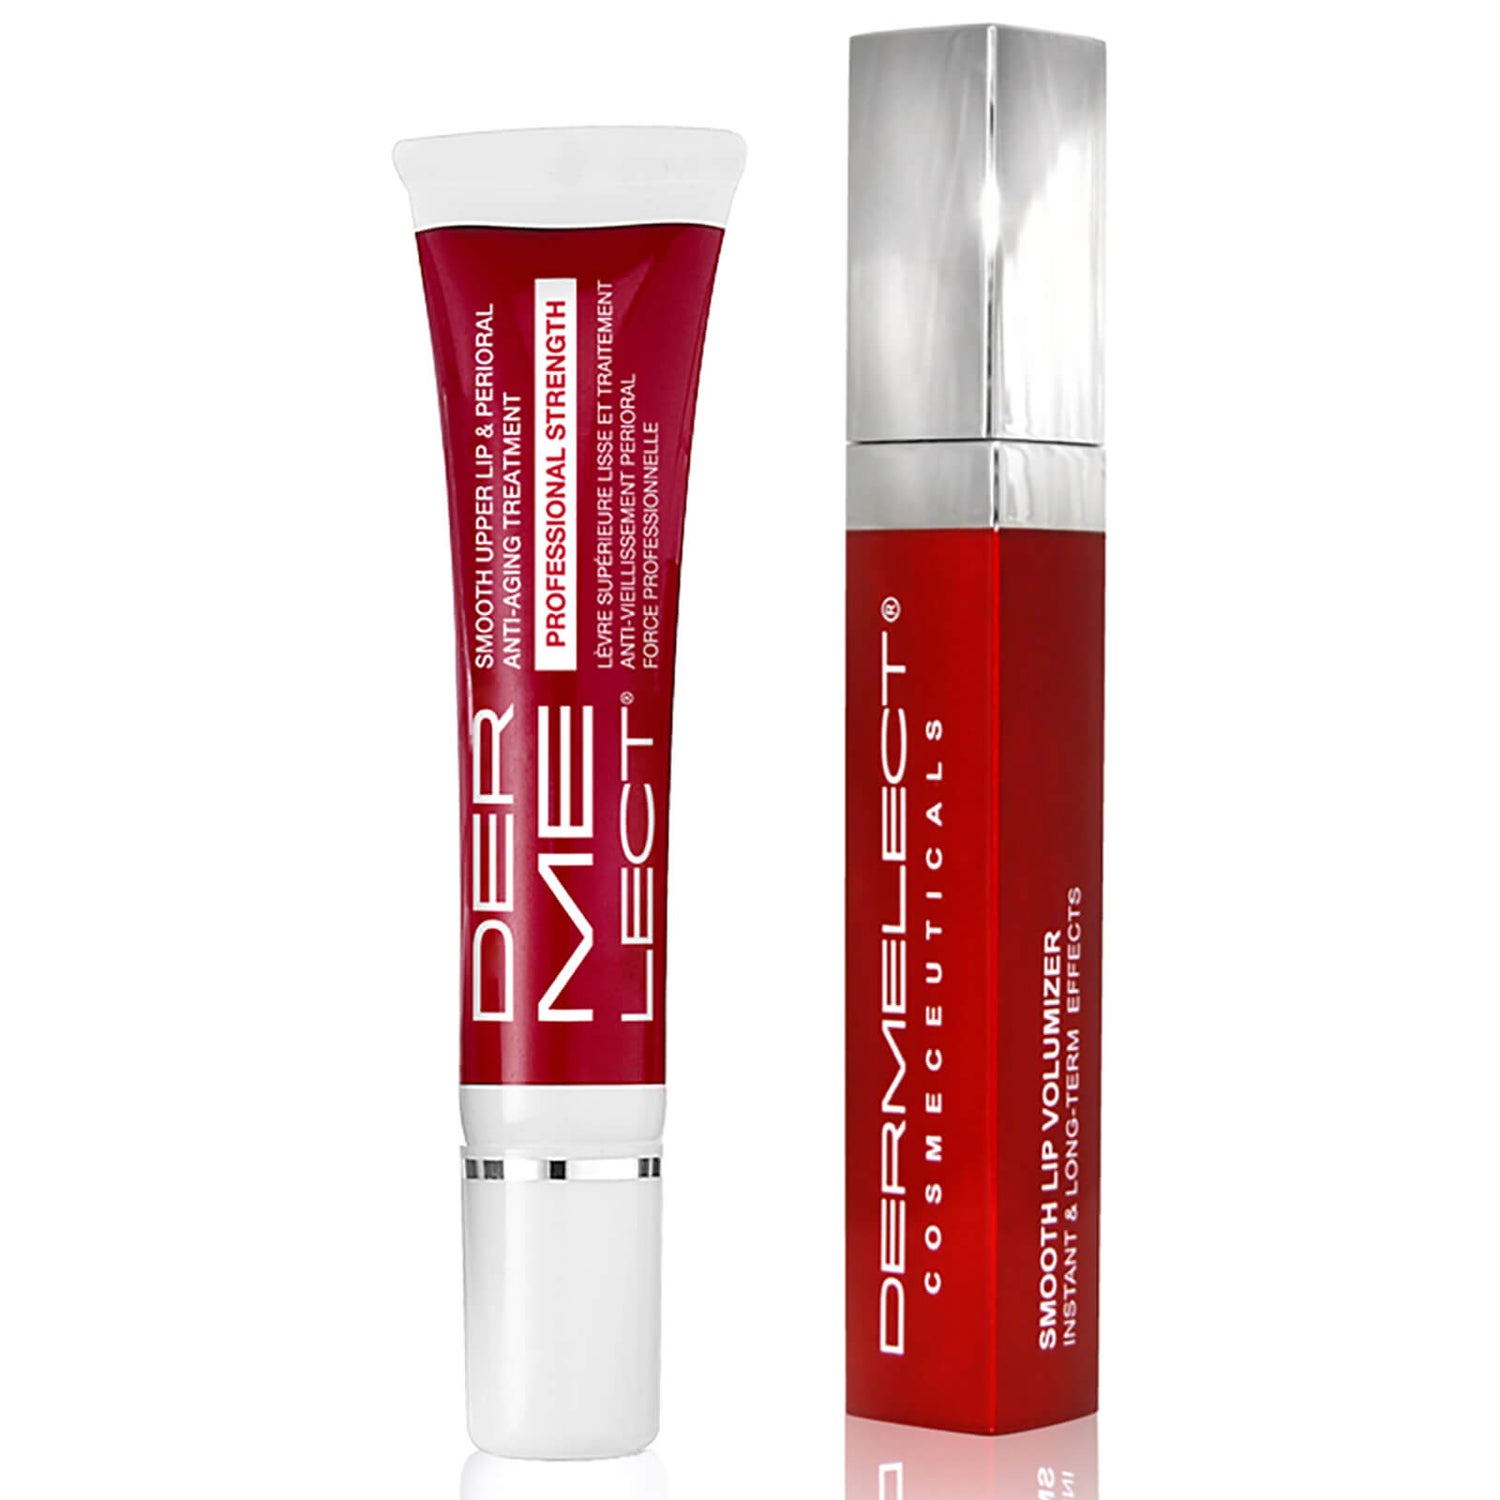 Dermelect Smooth Upper Lip and Perioral Anti Aging Duo